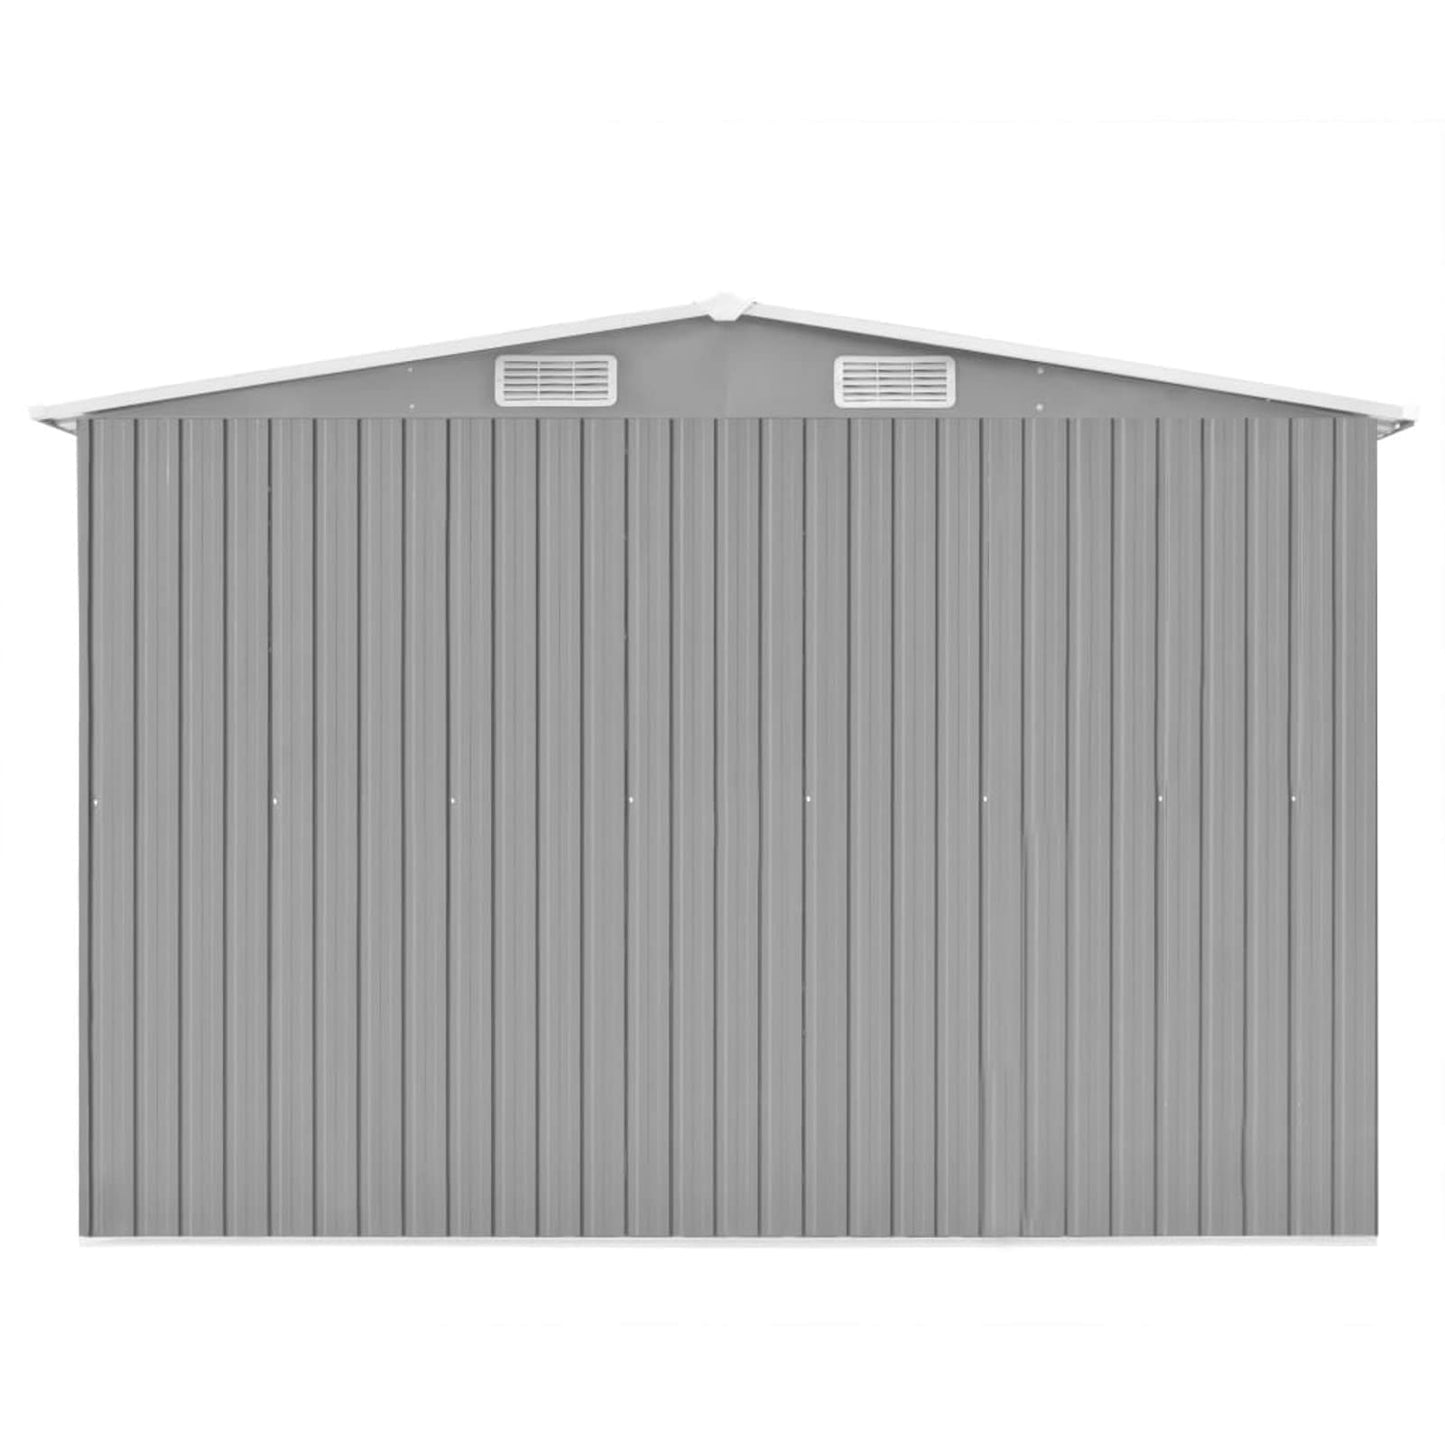 Gecheer Outdoor Storage Shed, Garden Shed House with Door & Vents, Galvanized Steel Storage Tool Shed for Backyard Patio Lawn for Bike, Garbage Can, Tool, Lawnmower 101.2"x117.3"x70.1" Metal Gray 101.2 x 117.3 x 70.1